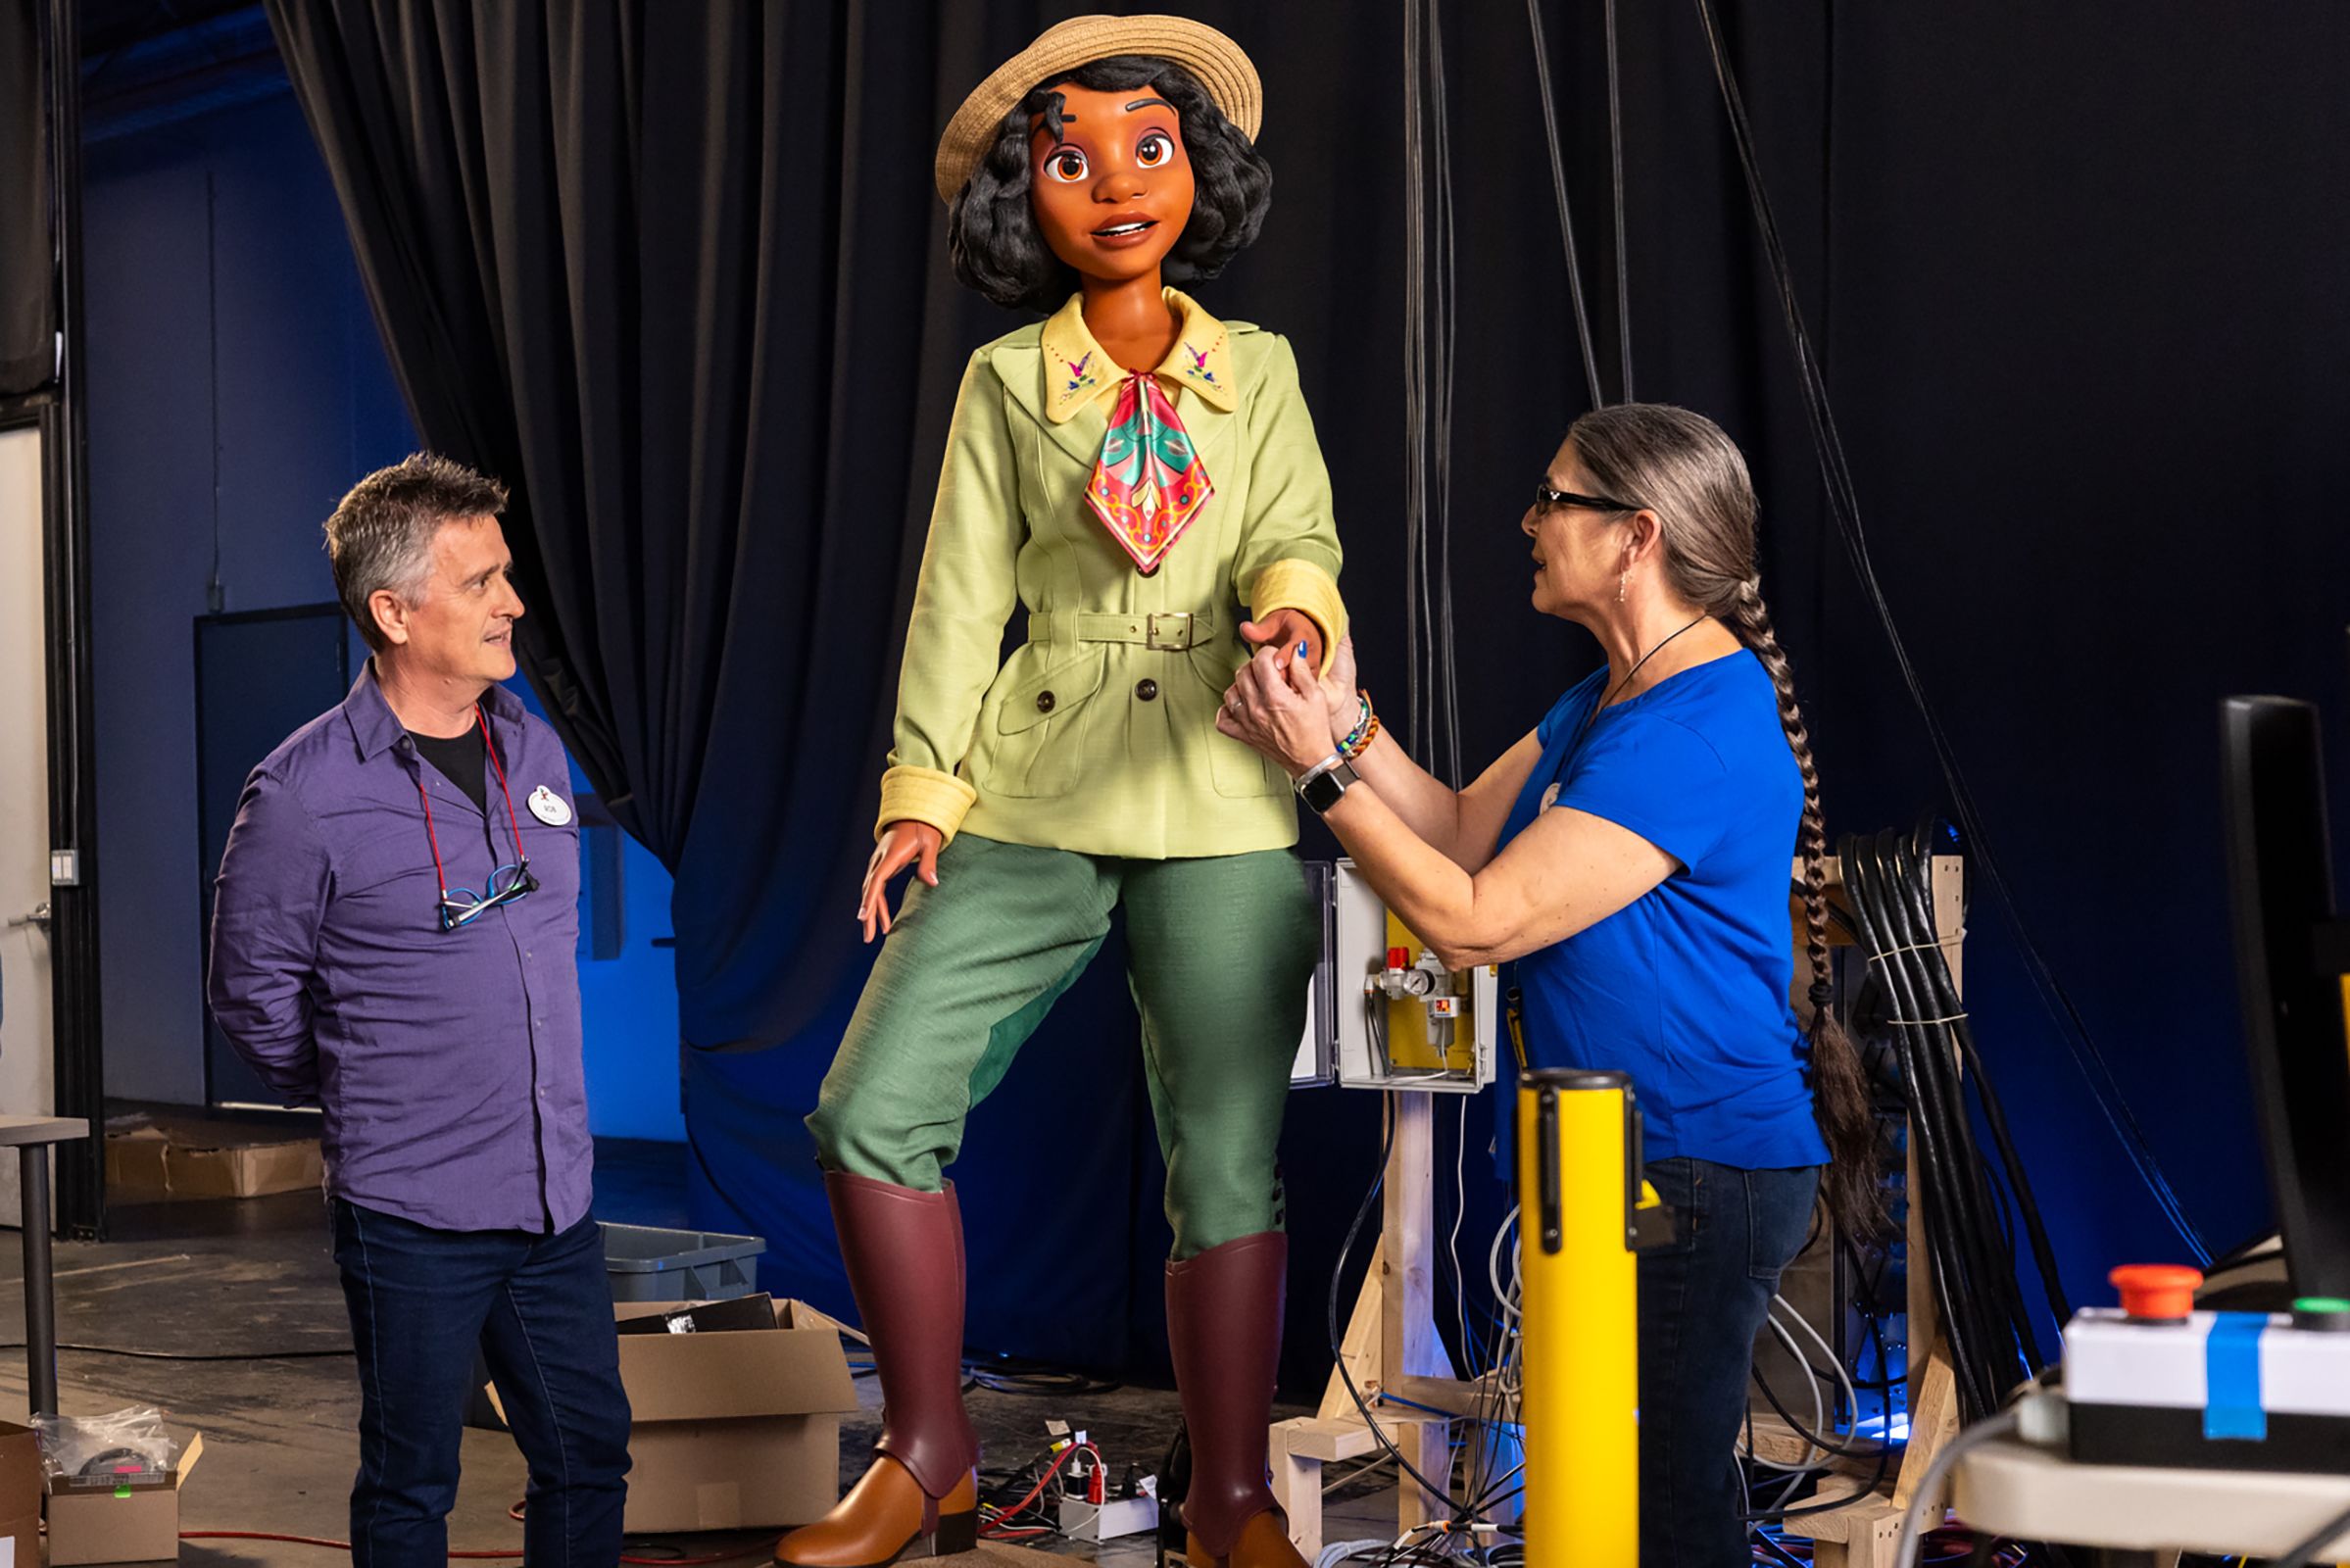 Figures for Tiana's Bayou Adventure were on view during the media tour.